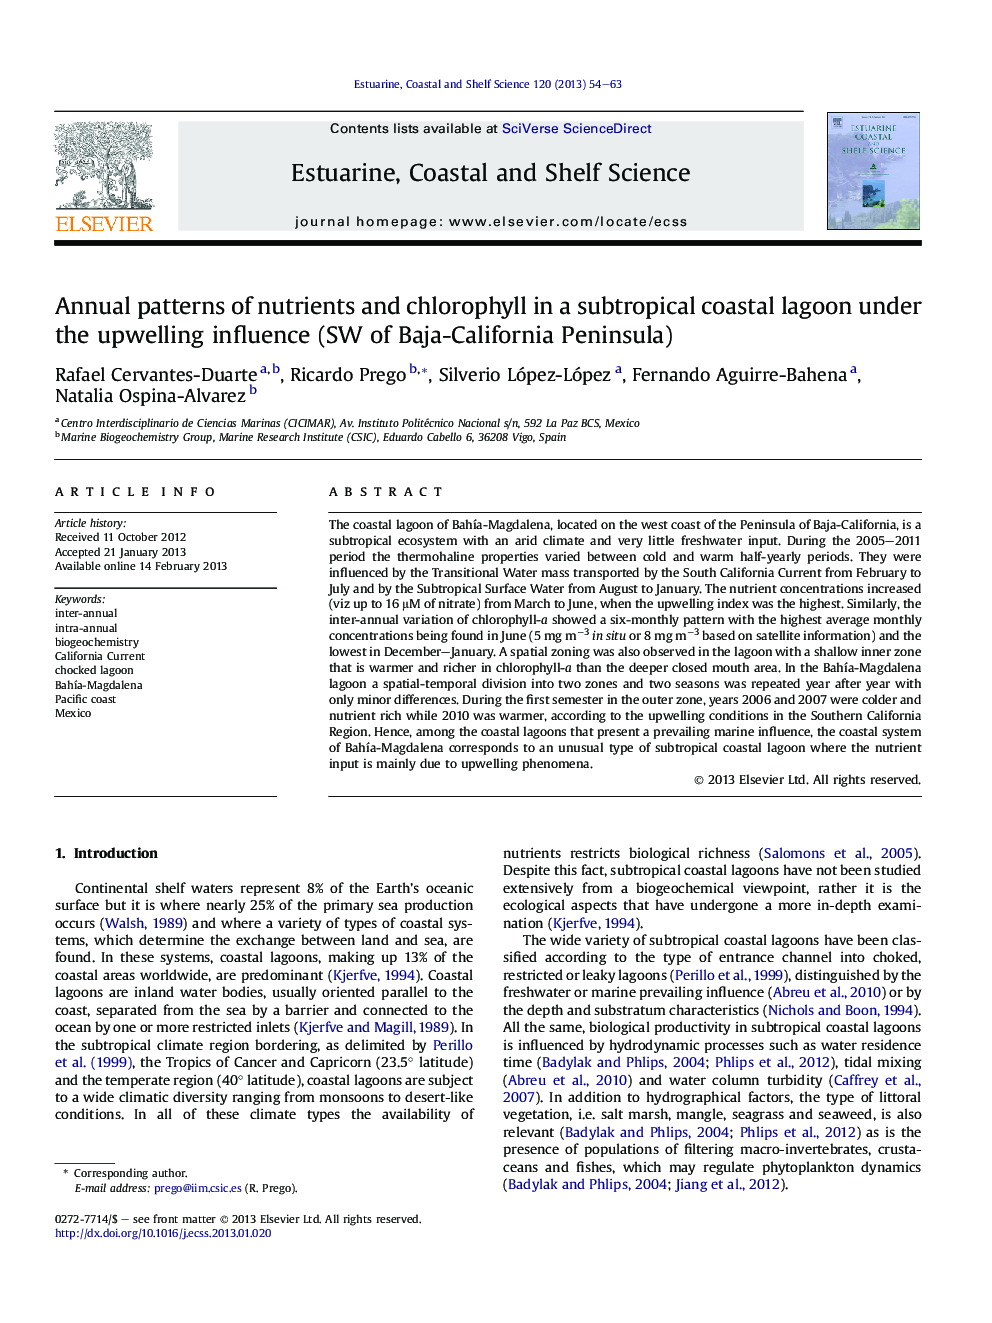 Annual patterns of nutrients and chlorophyll in a subtropical coastal lagoon under the upwelling influence (SW of Baja-California Peninsula)